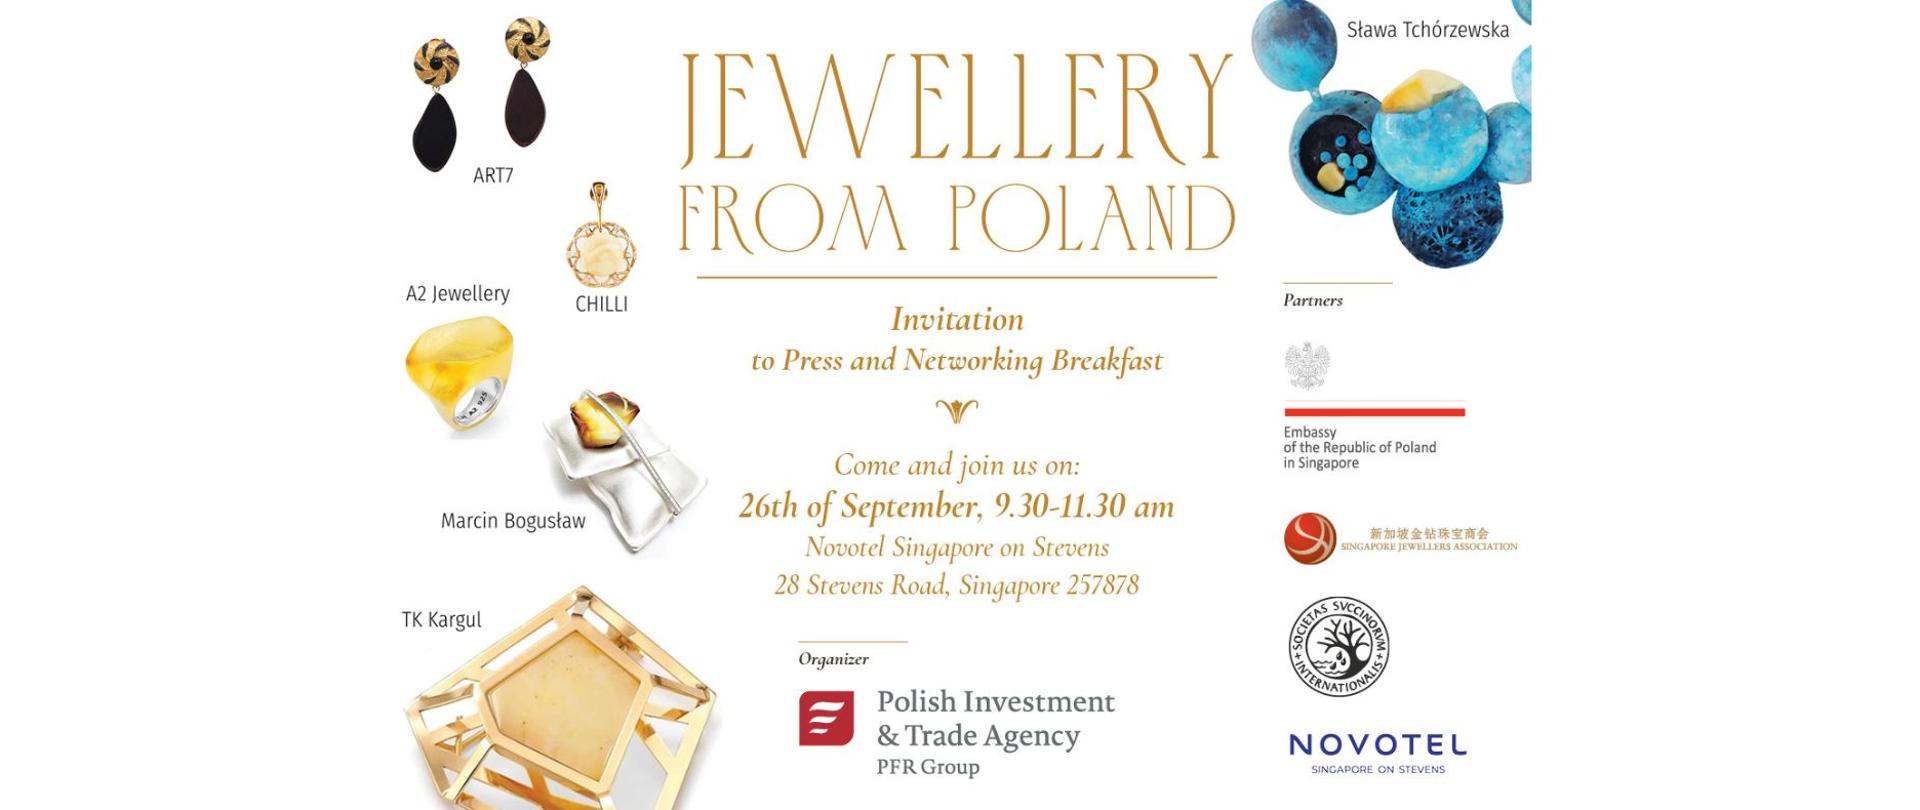  "Jewellery from Poland. Amber - Treasure of the Baltic Sea" - Press and networking breakfast 